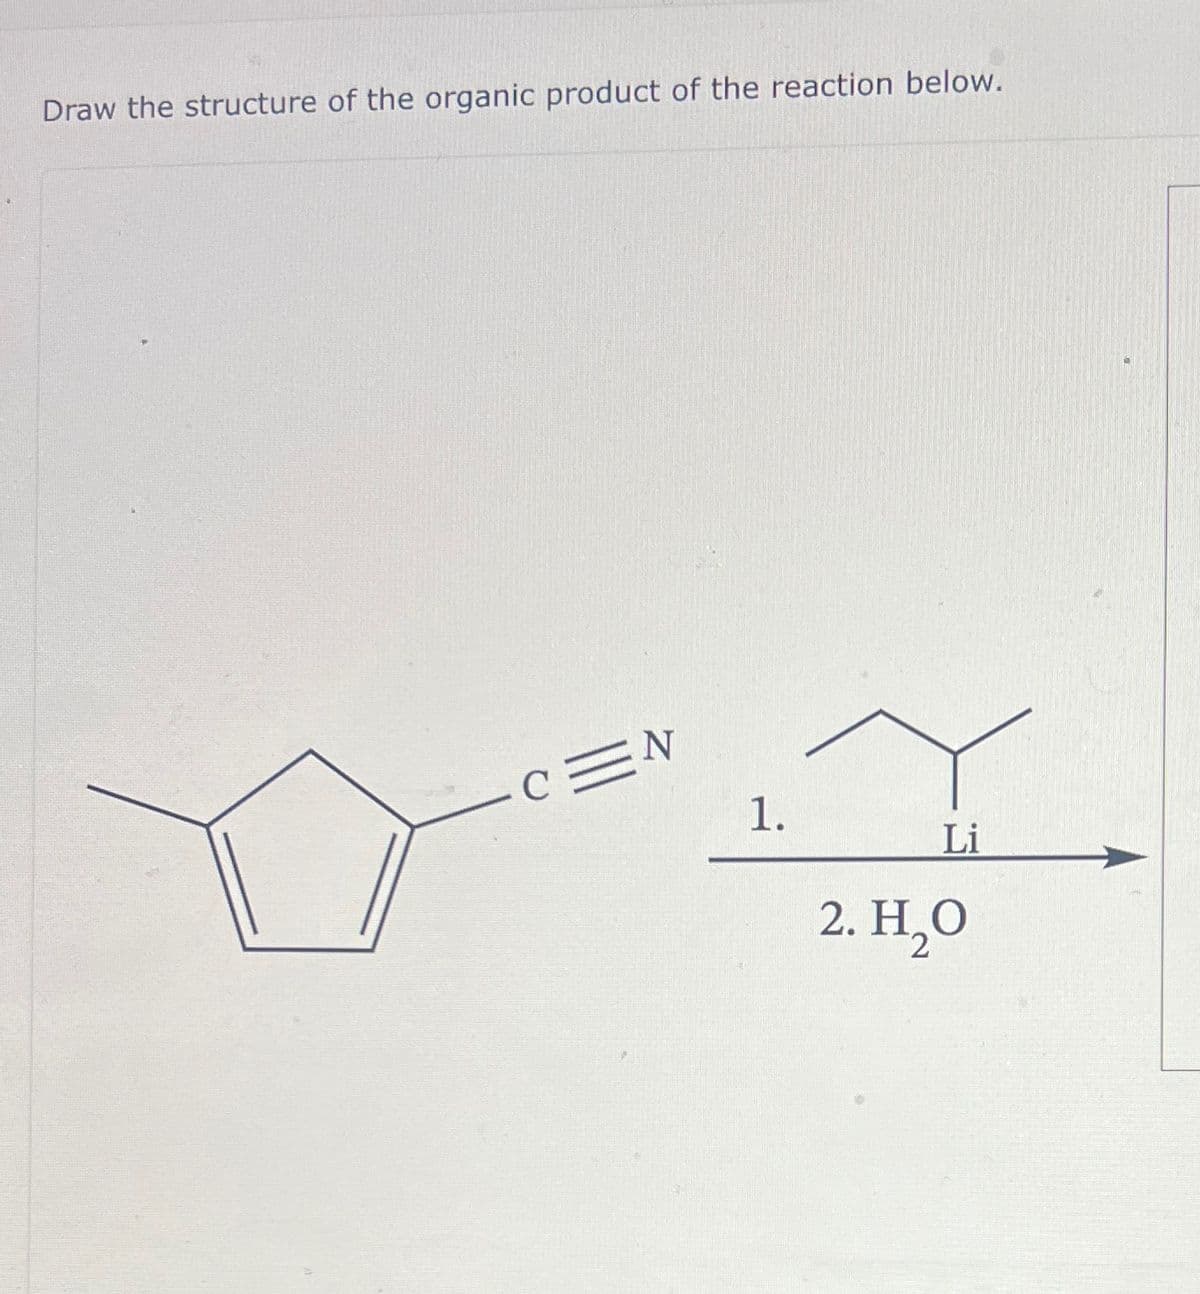 Draw the structure of the organic product of the reaction below.
C=N
1.
Li
2. H₂O